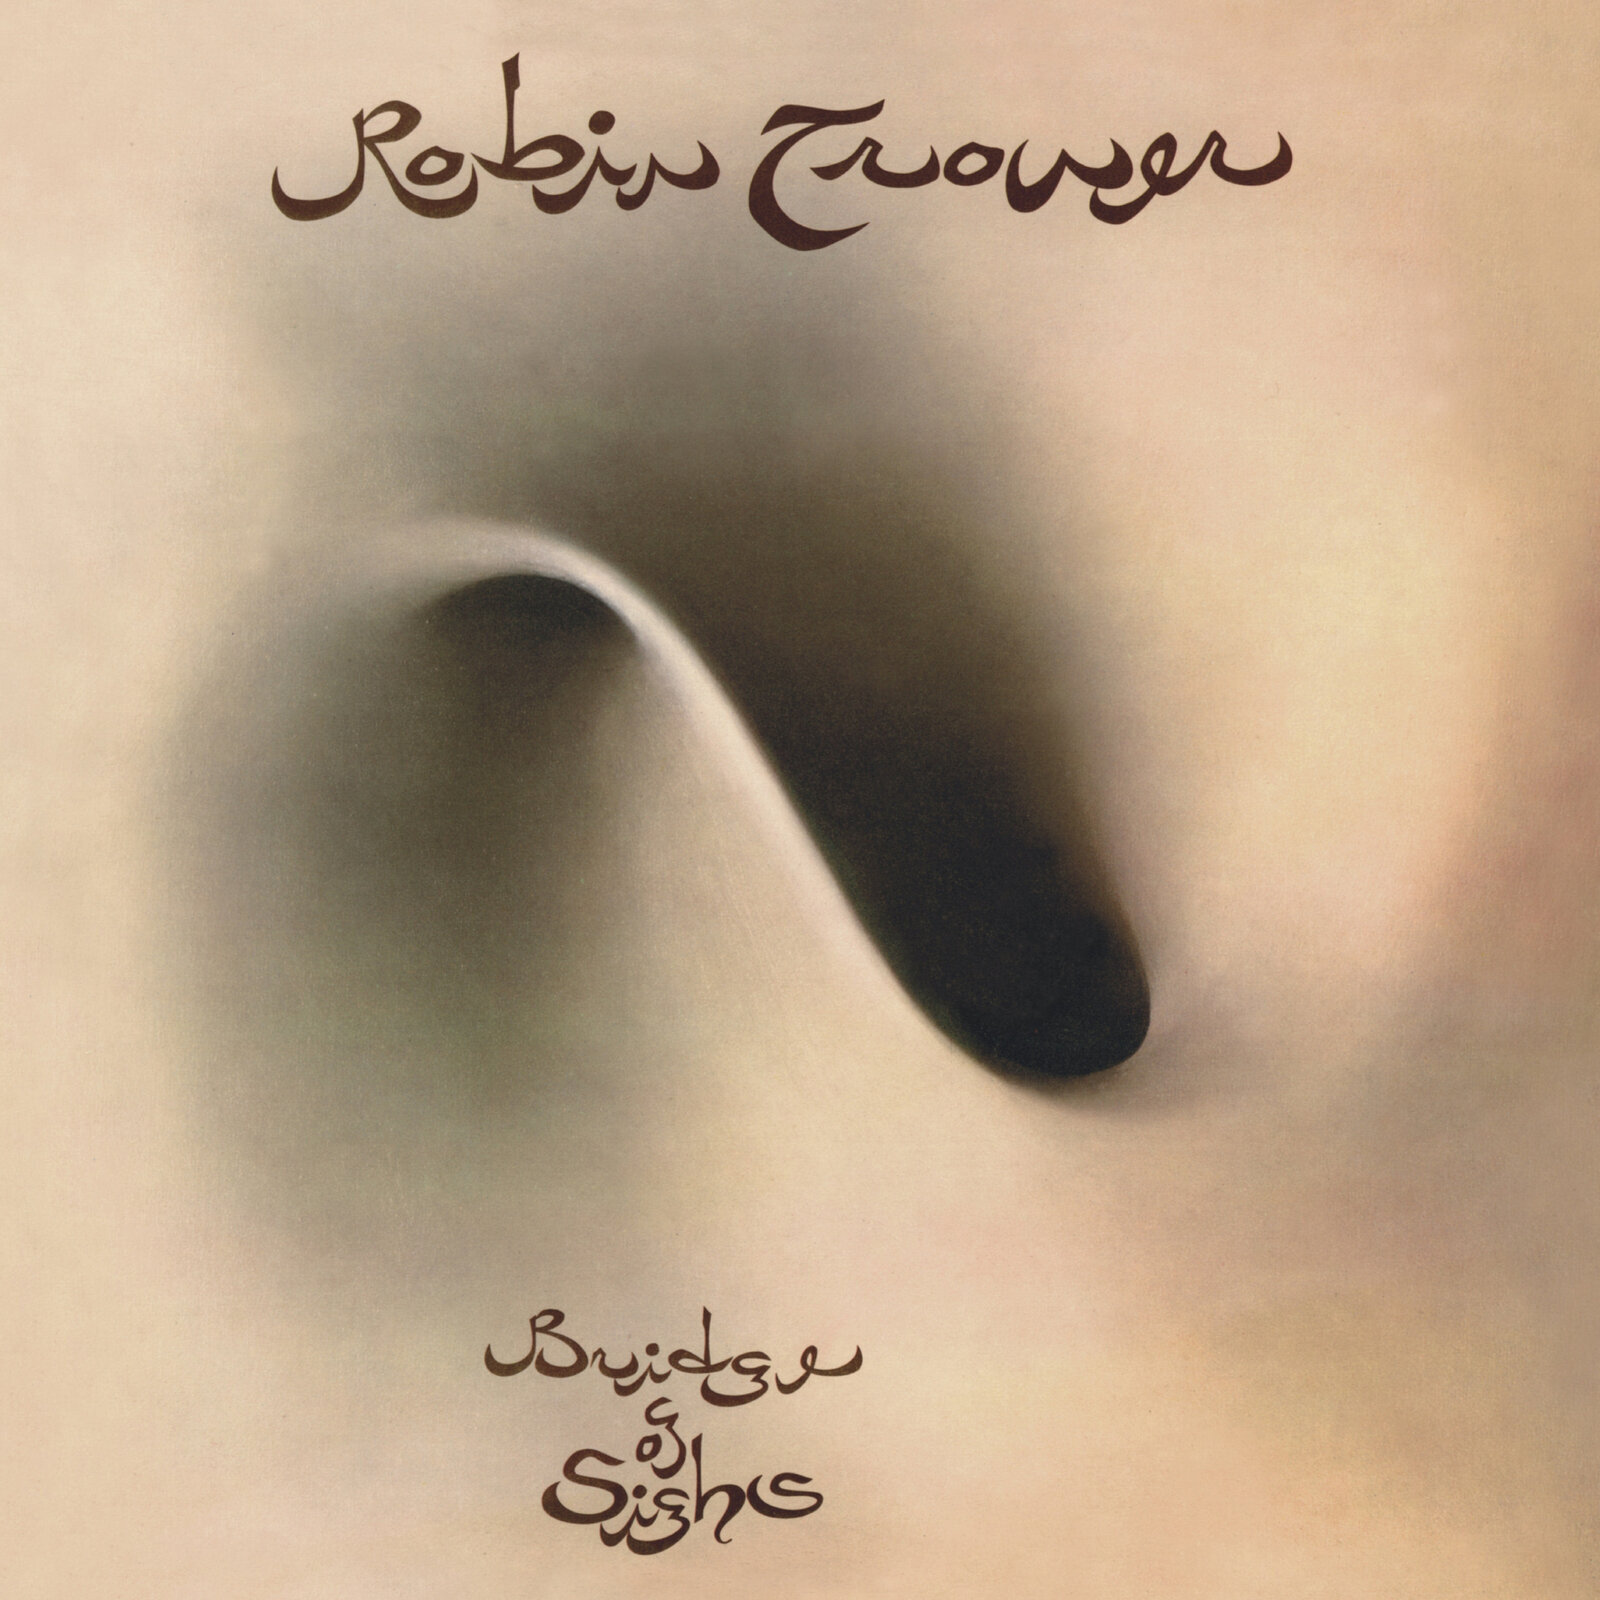 Disque vinyle Robin Trower - Bridge of Sighs (50th Anniversary Edition) (High Quality) (2 LP)